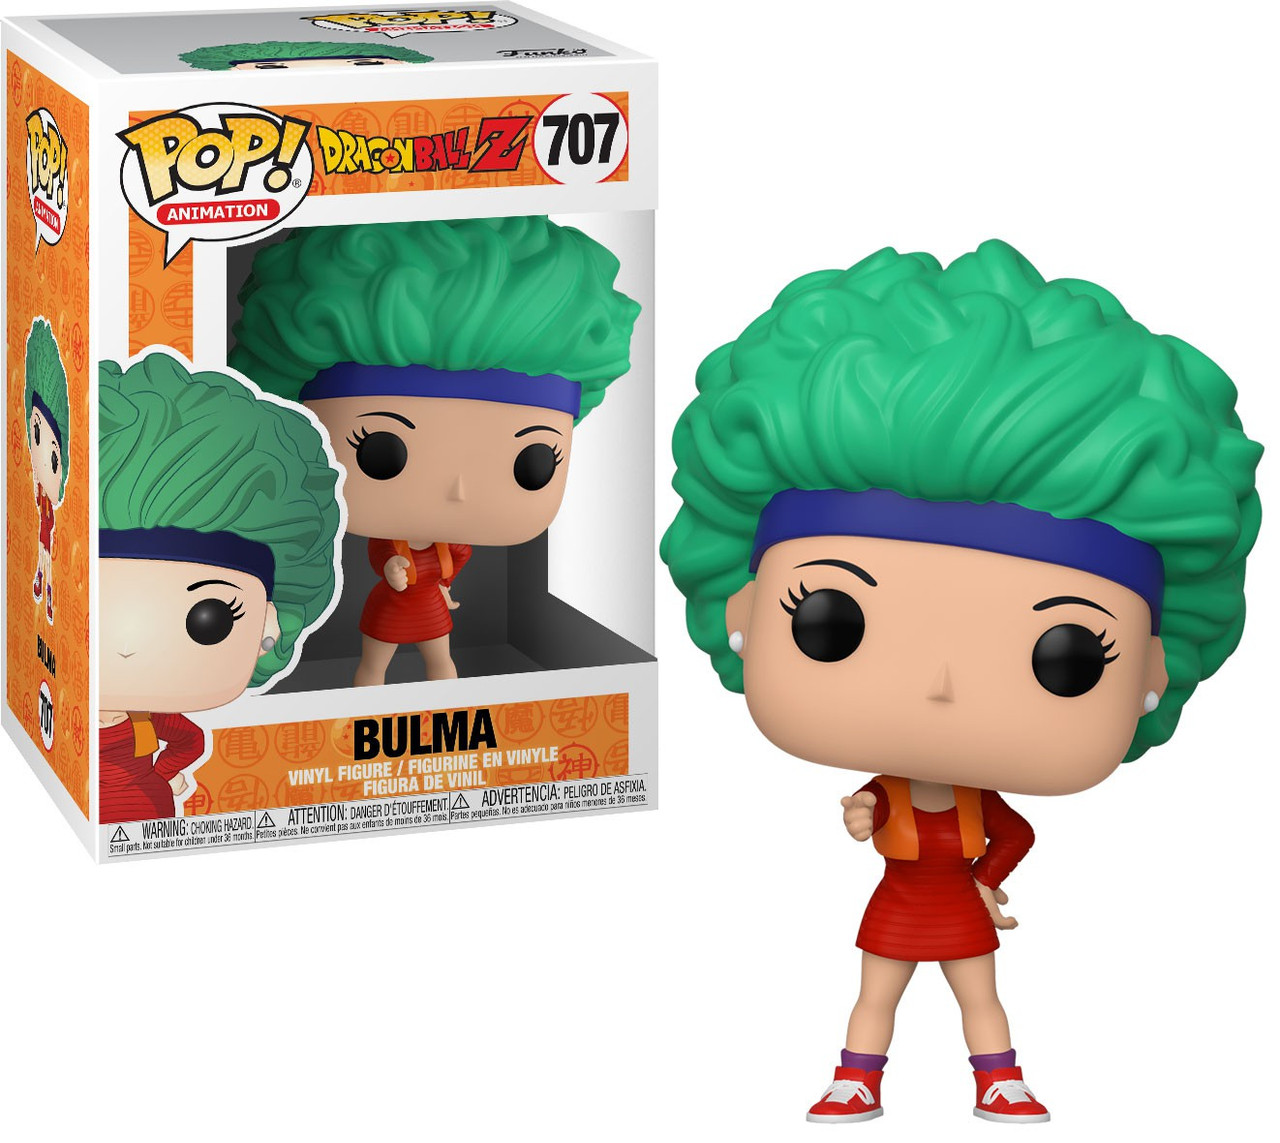 Pictures of bulma from dragon ball z